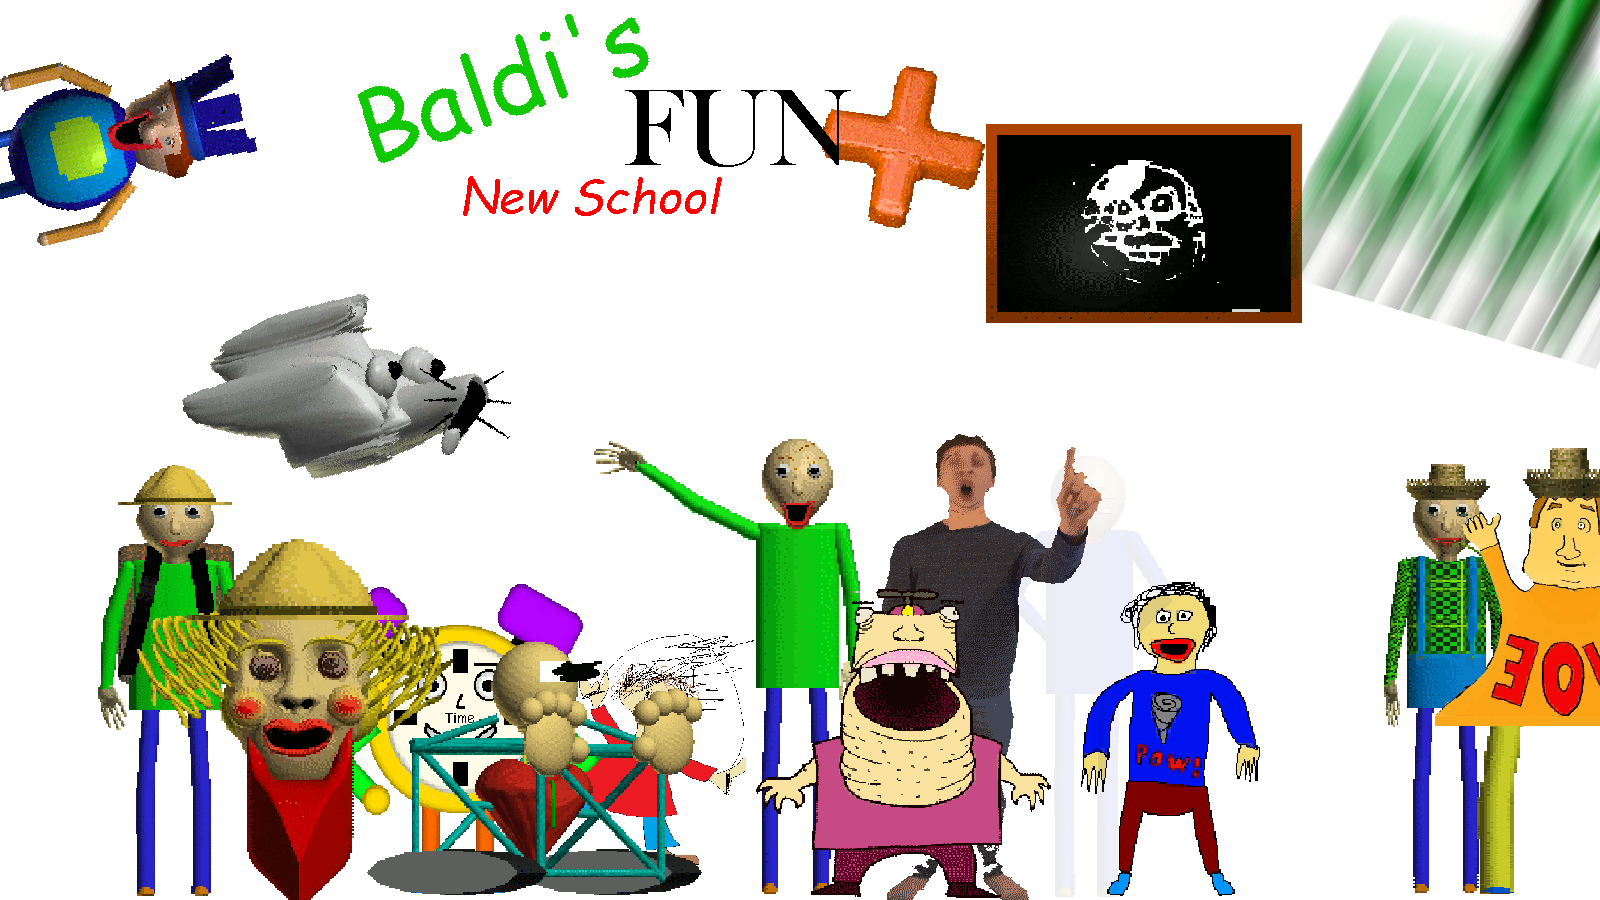 Comments 255 To 216 Of 303 Baldi S Fun New School Plus Alpha 5 By Johnsterspacegames